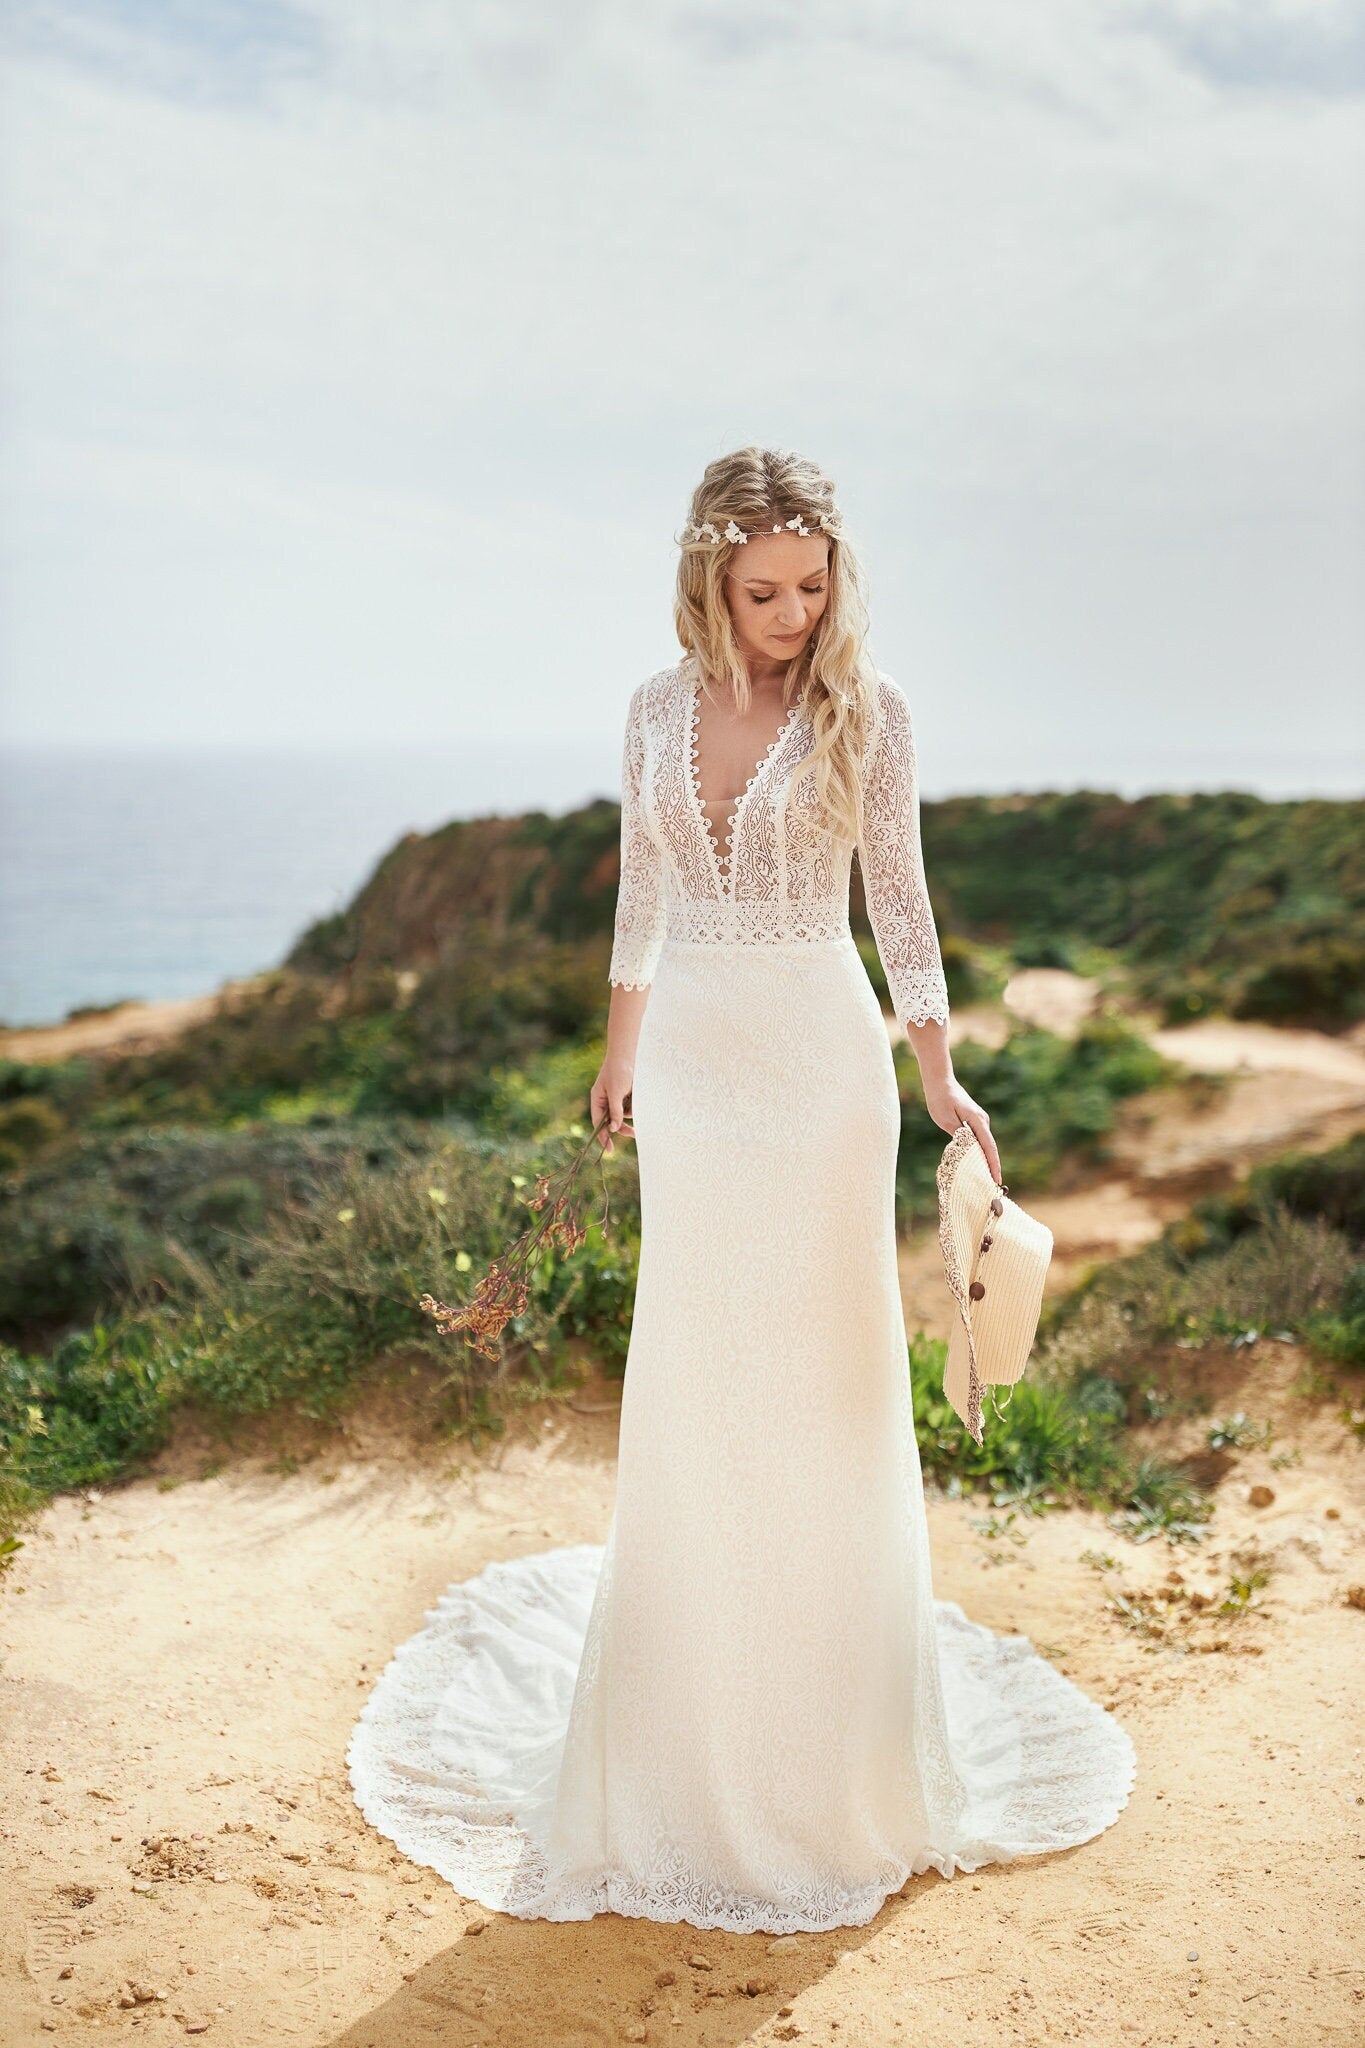 Lace wedding dress with sleeves simple boho